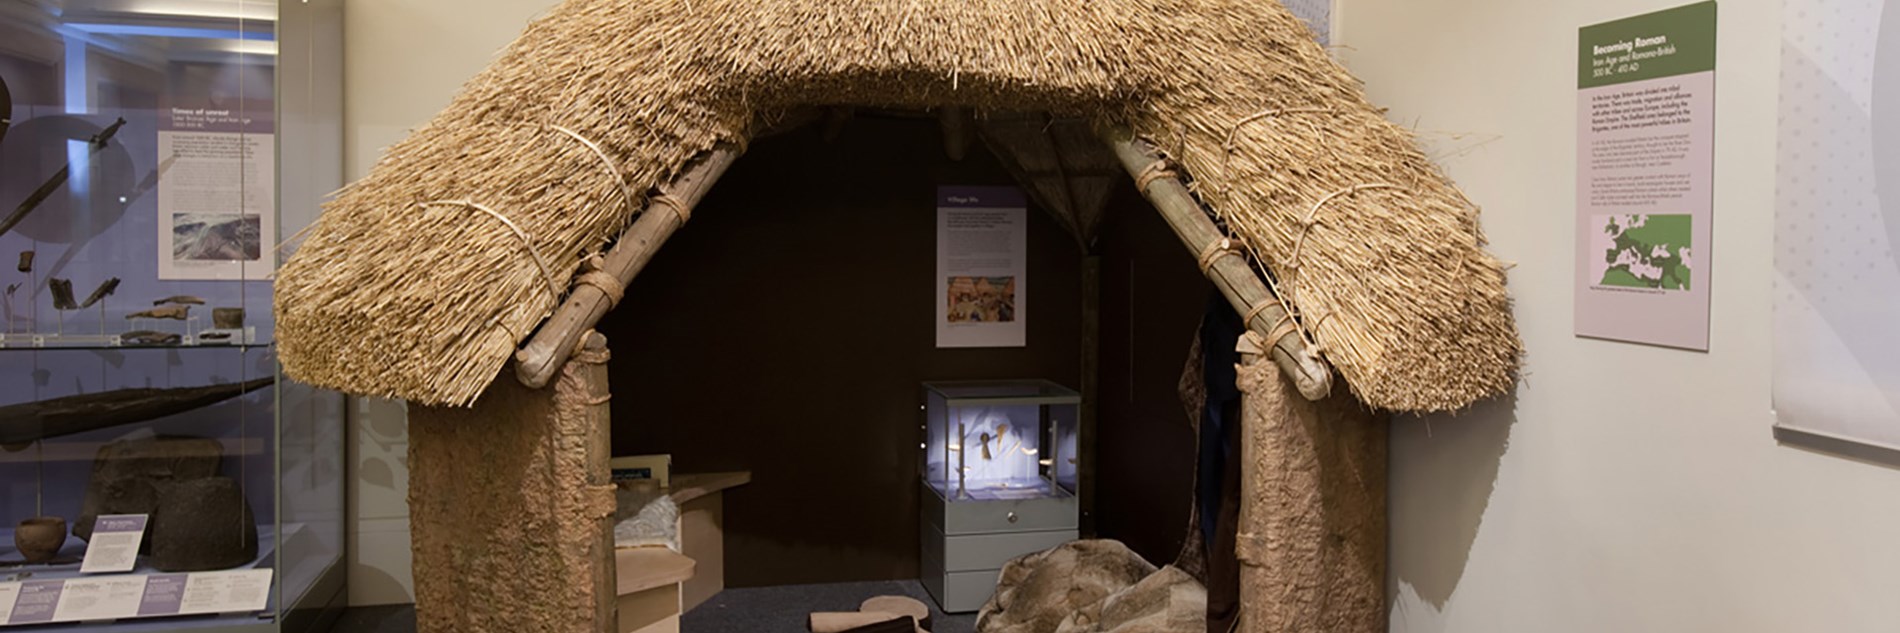 A thatched small round building with a large doorway through which you can see the interior including a replica camp fire. There are a couple of display cases inside and outside the roundhouse which hold artefacts and information sheets. 